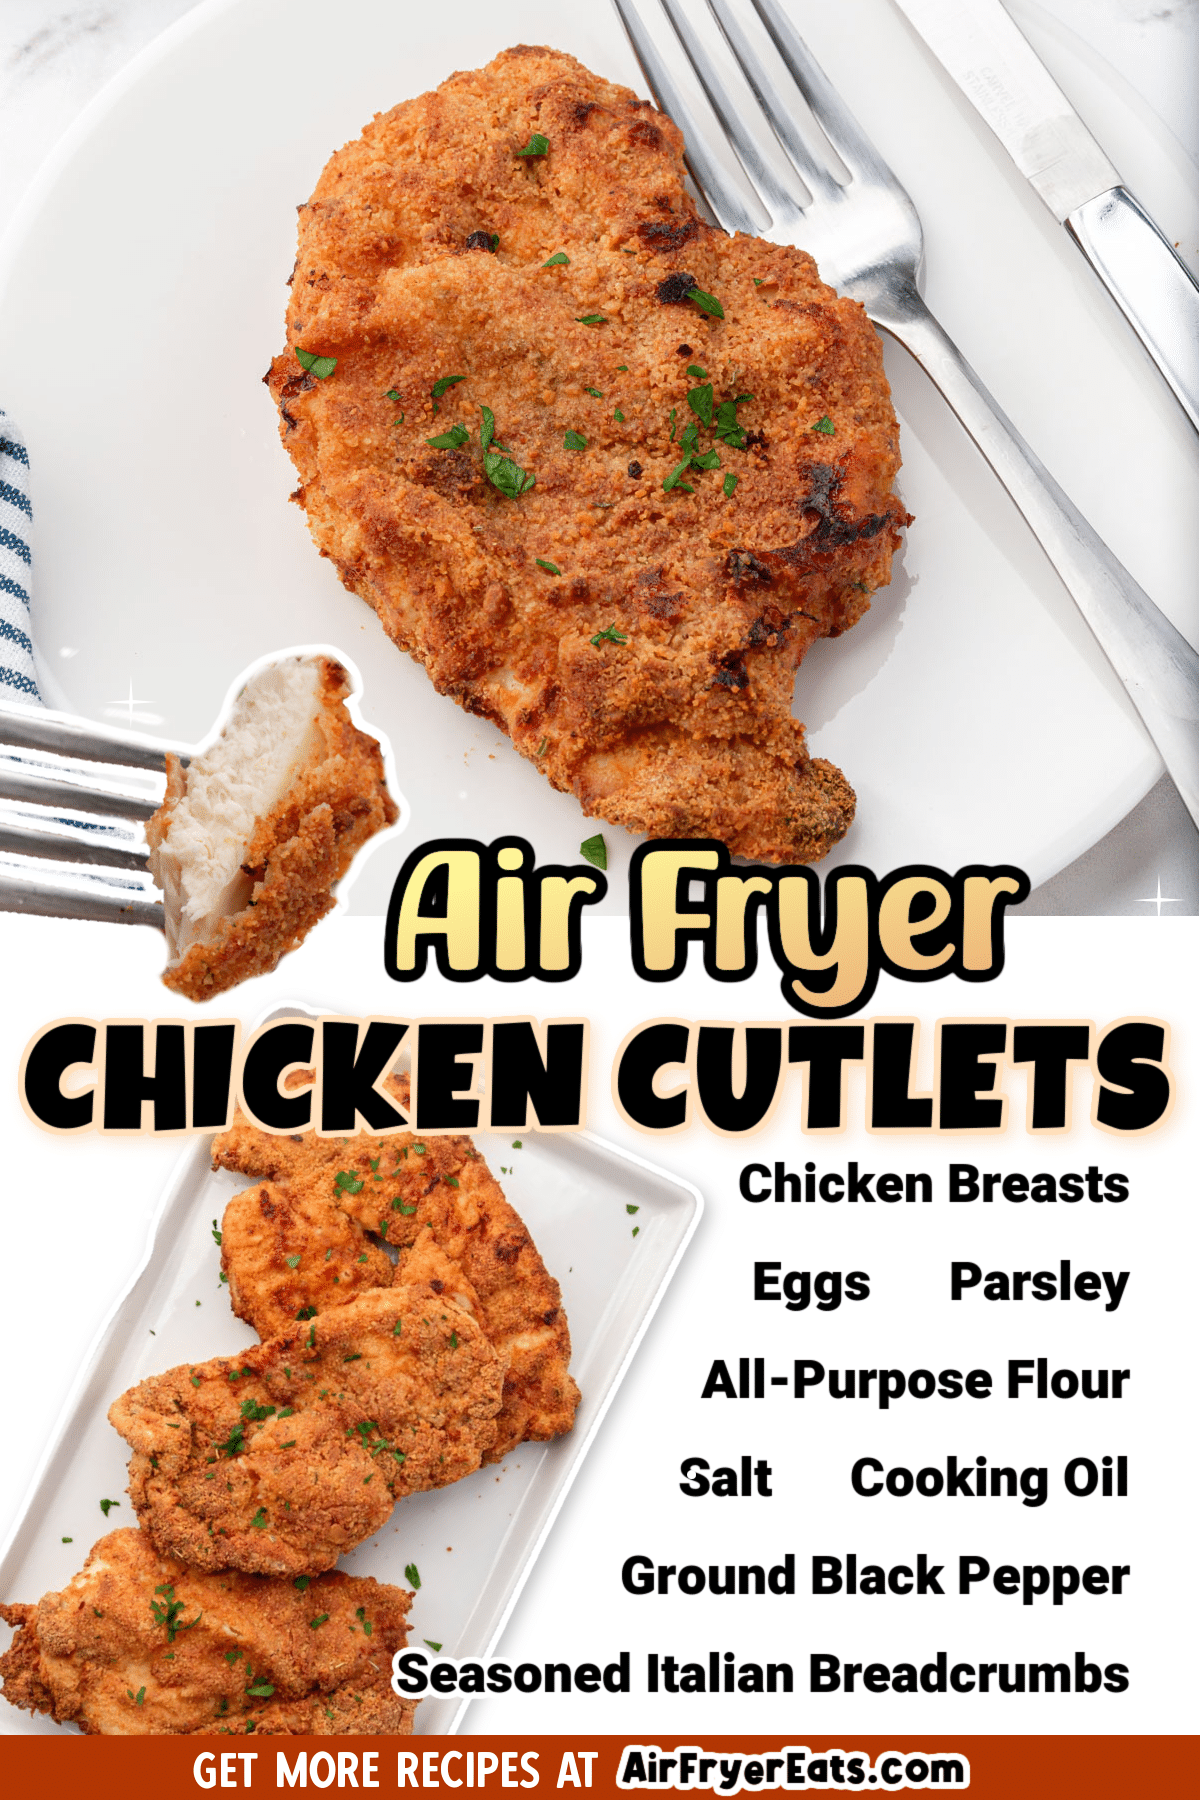 Air Fryer Chicken Cutlets are so easy to make! Coated in a mix of Italian bread crumbs and simple seasonings, these crispy cutlets are cooked in the air fryer with just a small amount of oil, and ready in under 20 minutes. via @vegetarianmamma